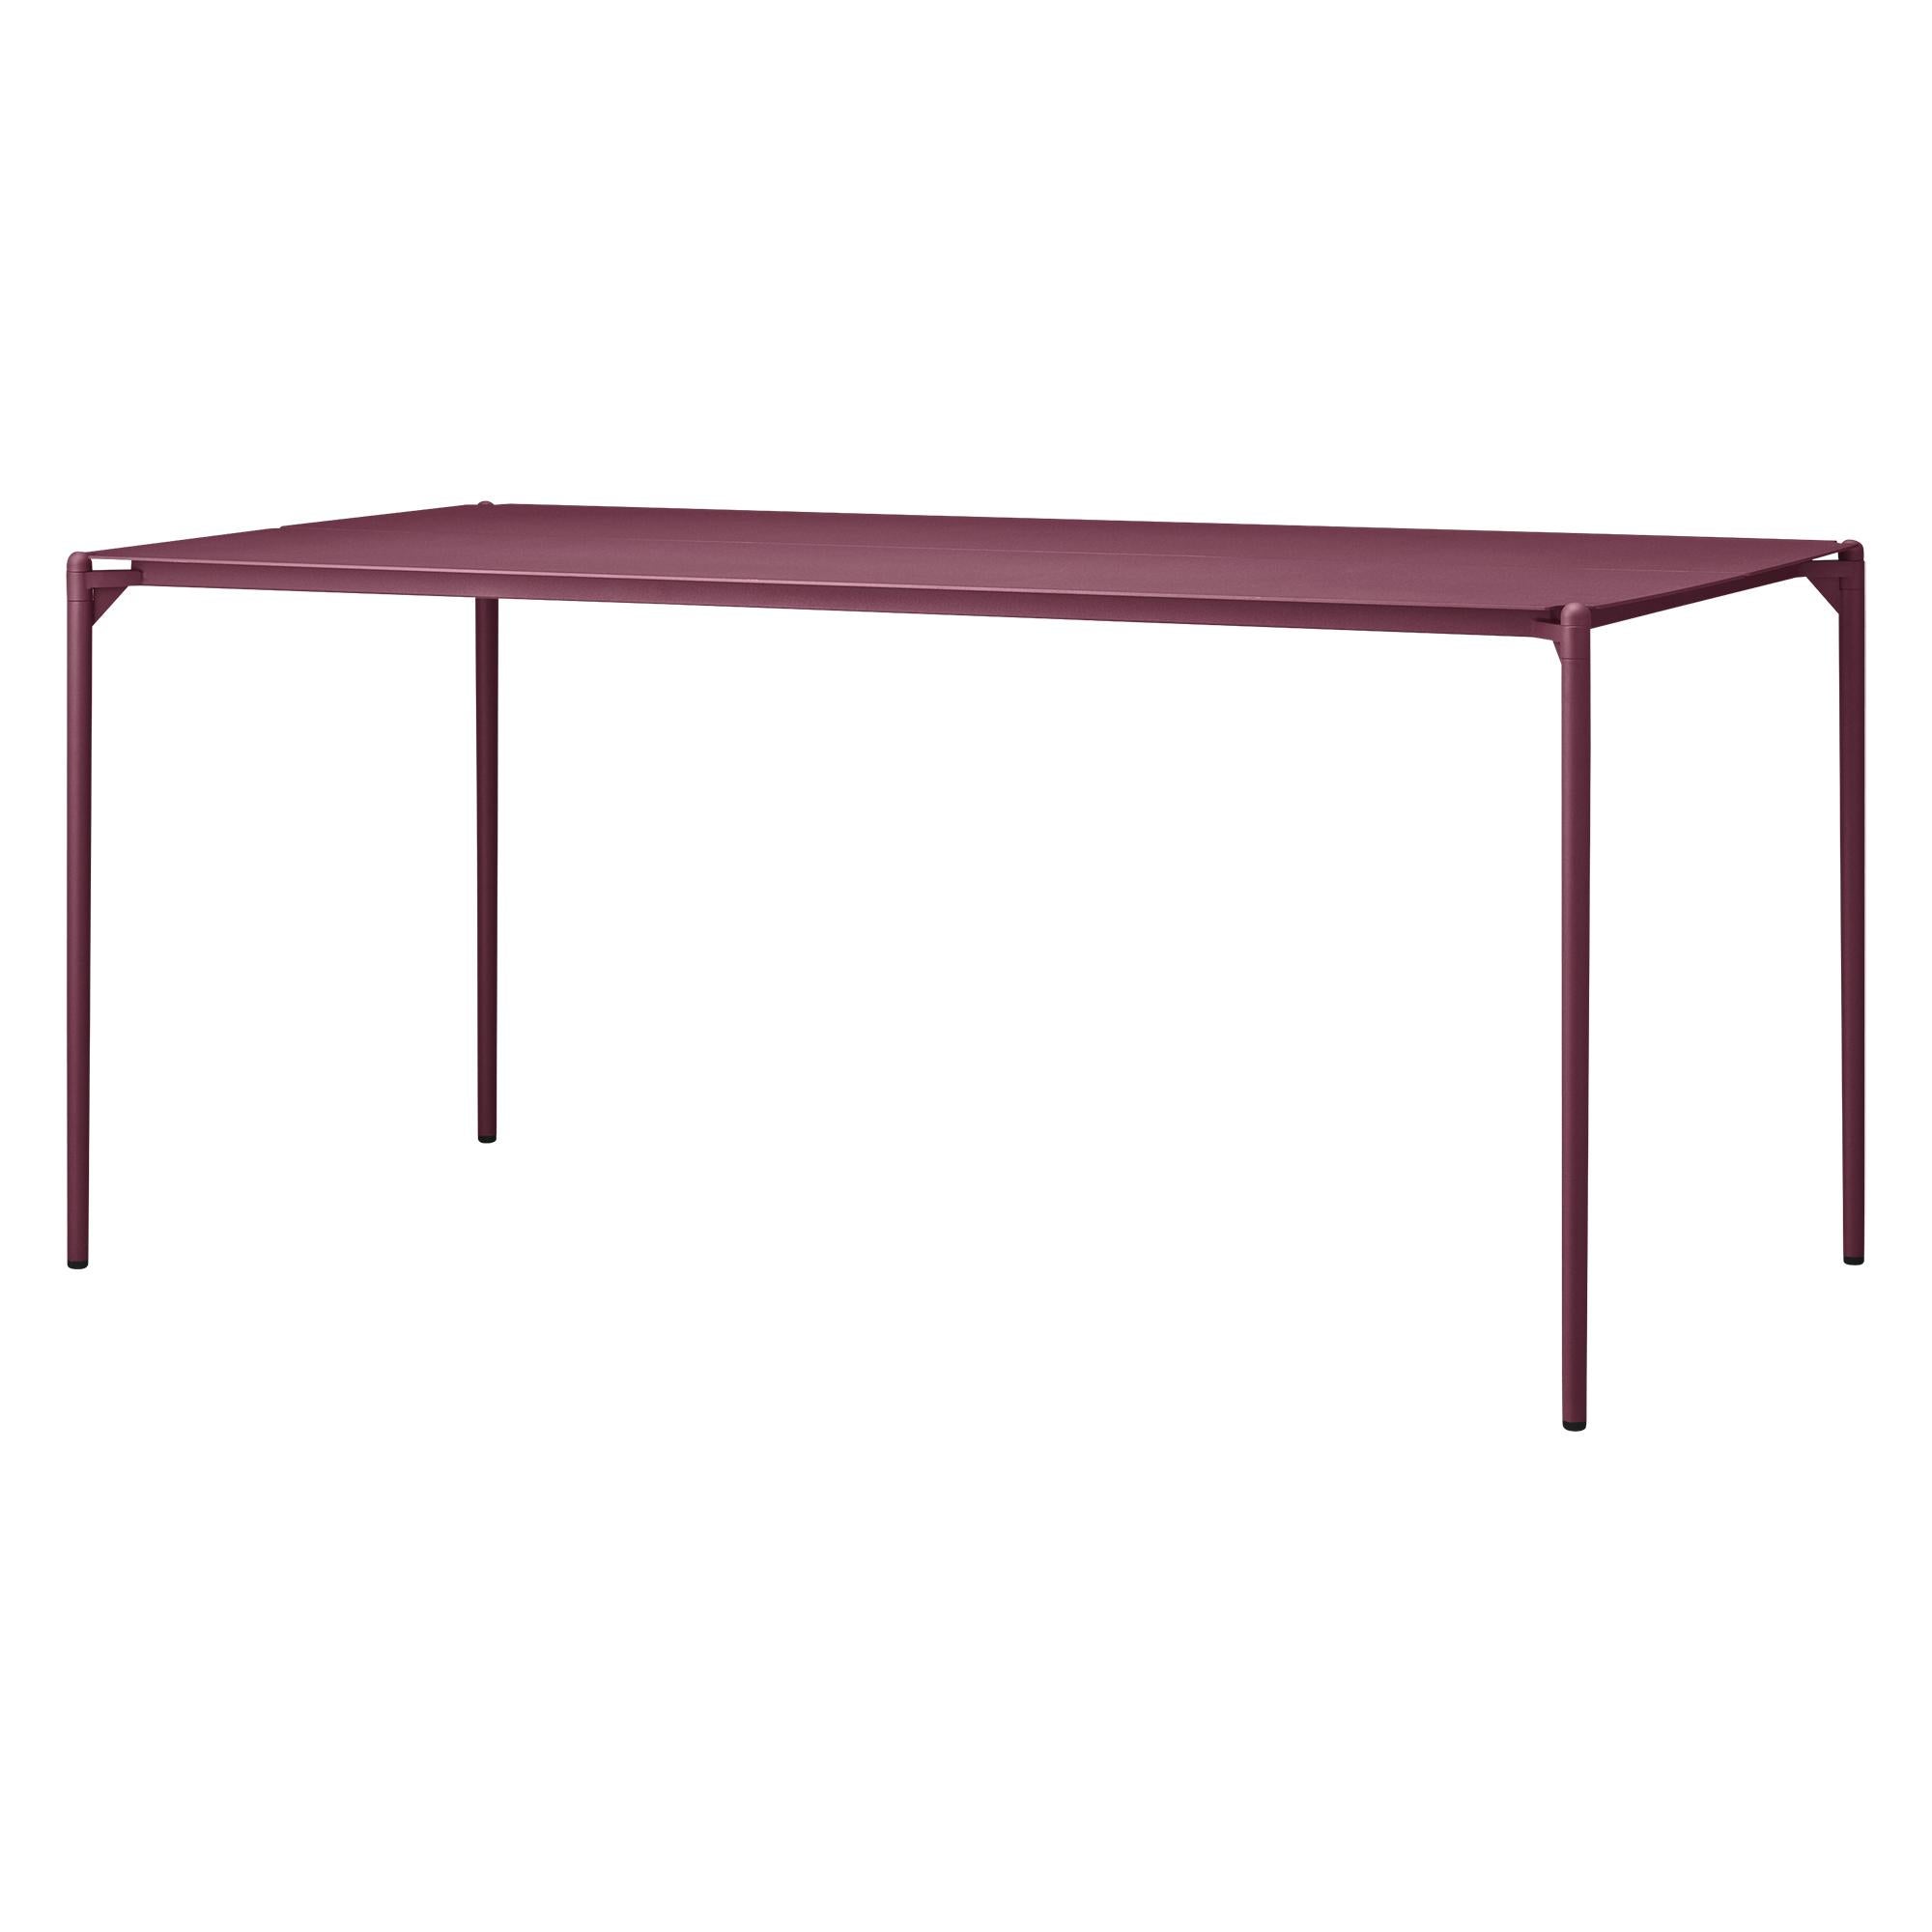 Medium Bordeaux minimalist table
Dimensions: D 160 x W 80 x H 72 cm 
Materials: Steel w. Matte Powder Coating & Aluminum w. Matte Powder Coating.
Available in colors: Taupe, Bordeaux, Forest, Ginger Bread, Black and, Black and Gold. 


Bring